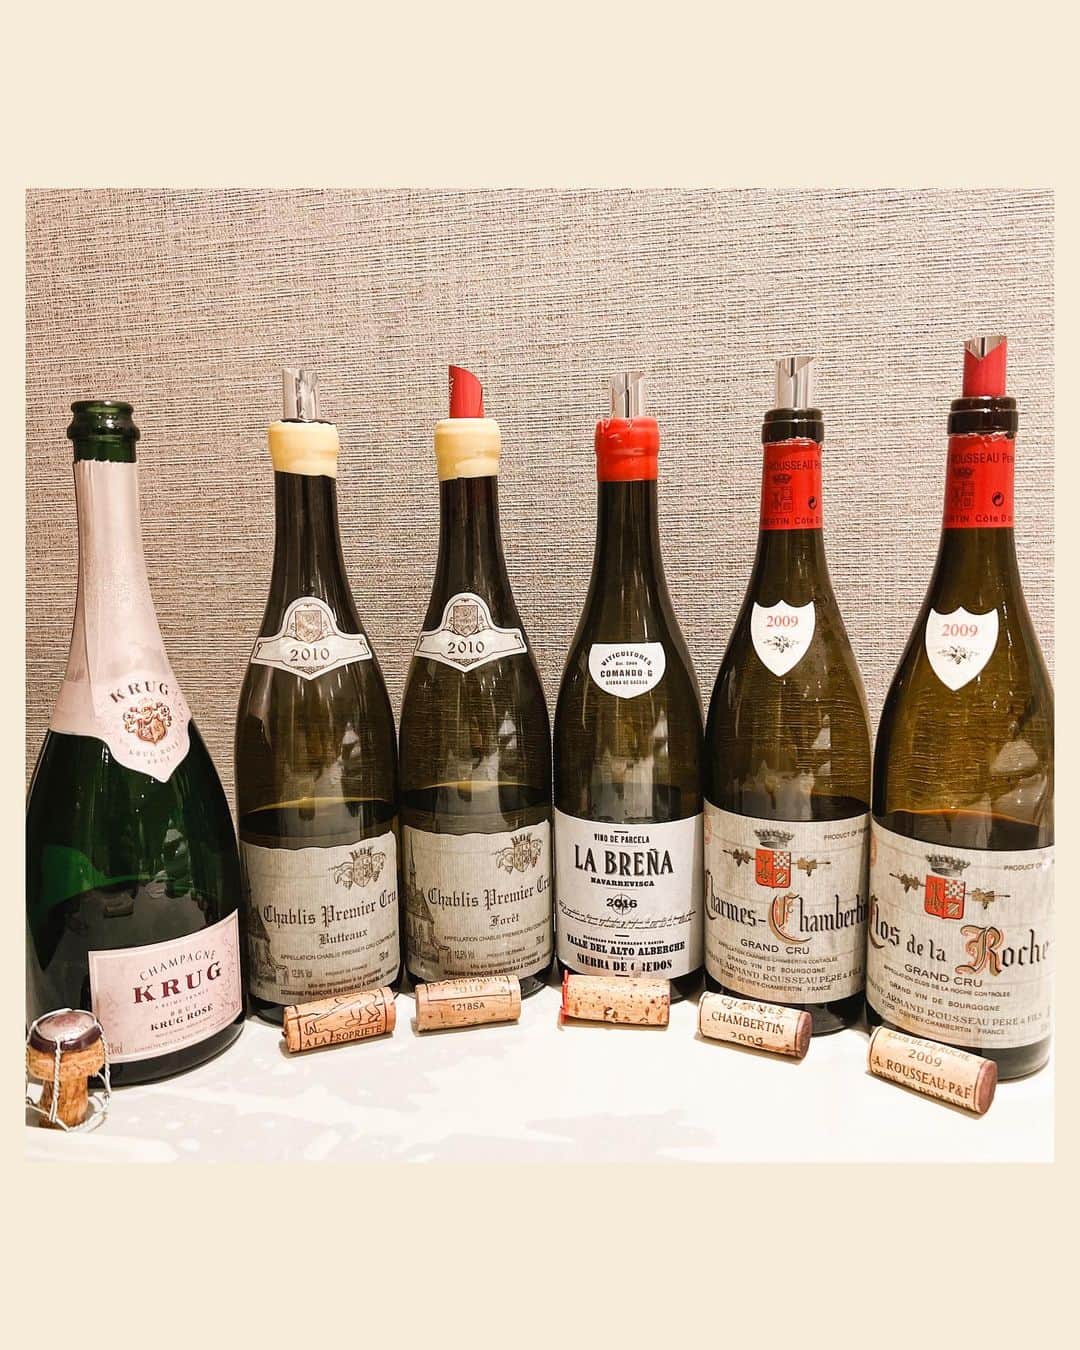 Ruby Kwanのインスタグラム：「Last night at The Sports Club with this wine line up. 🍷😍🥂  • Krug Rose NV • Raveneau Chablis Butteaux 2010 • Raveneau Chablis Foret 2010 • Comando G La Brena 2016 • Rousseau Charmes Chambertin 2009 • Rousseau Clos de la Roche 2009  First, start with an old #Krug Rose, which is over at least 10 years old. 🥀   Raveneau Chablis Butteaux 2010 & Raveneau Chablis Foret 2010 has to drink in parallel. Single variable. Same domaine, same grape, same year, just with different field. Butteaux and Foret are just next to each other, but the aroma and taste are totally different.   One of the 874 bottles of Comando G La Brena 2016 ever exist on earth was gone last night. Hahaa! 🤭  Rousseau Charmes Chambertin 2009 & Rousseau Clos de la Roche 2009 has to drink in parallel as well. Also single variable. Charmes is more feminine and elegant while la Roche is masculine and powerful. 🍷🍷  Good food, good wine and good friends. Such a cheers moment. ❤️  #rougeclosetdining #krugchampagne #krugrosé #domaineraveneau #RaveneauChablis #RaveneauChablisButteaux #RaveneauChablisForet #comandoglabreña #ComandoG #RousseauCharmesChambertin #RousseauClosdelaRoche #domainerousseau #thesportsclub #五陵會」